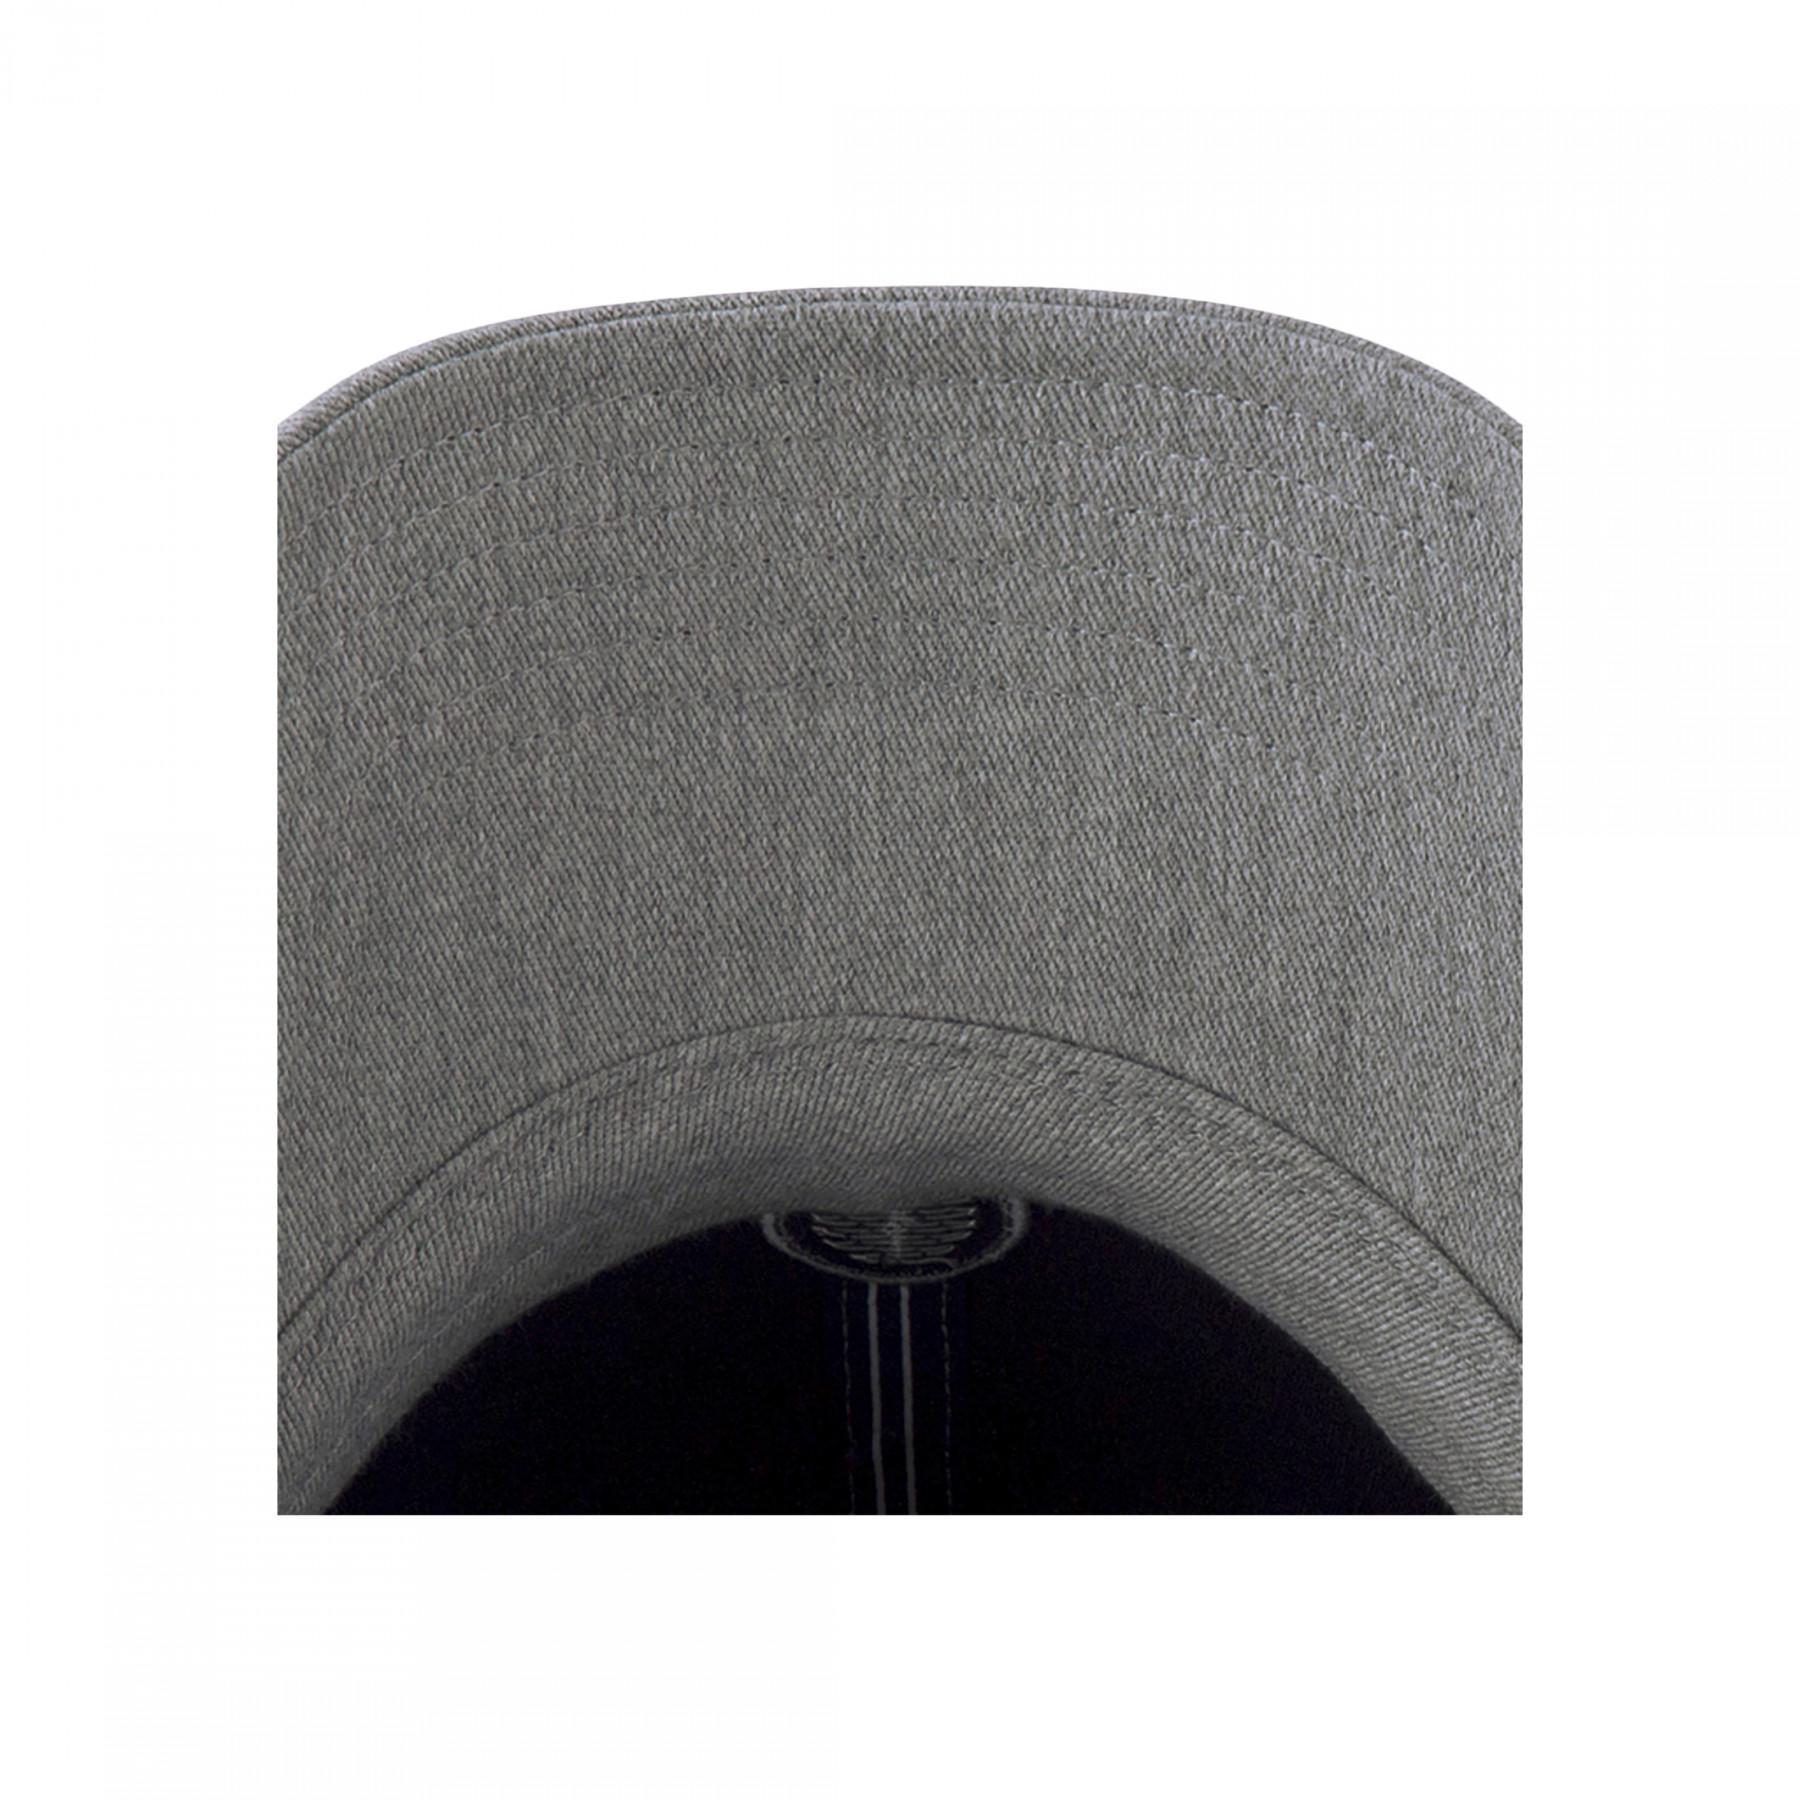 Cap Cayler & Sons wl mont mercy curved